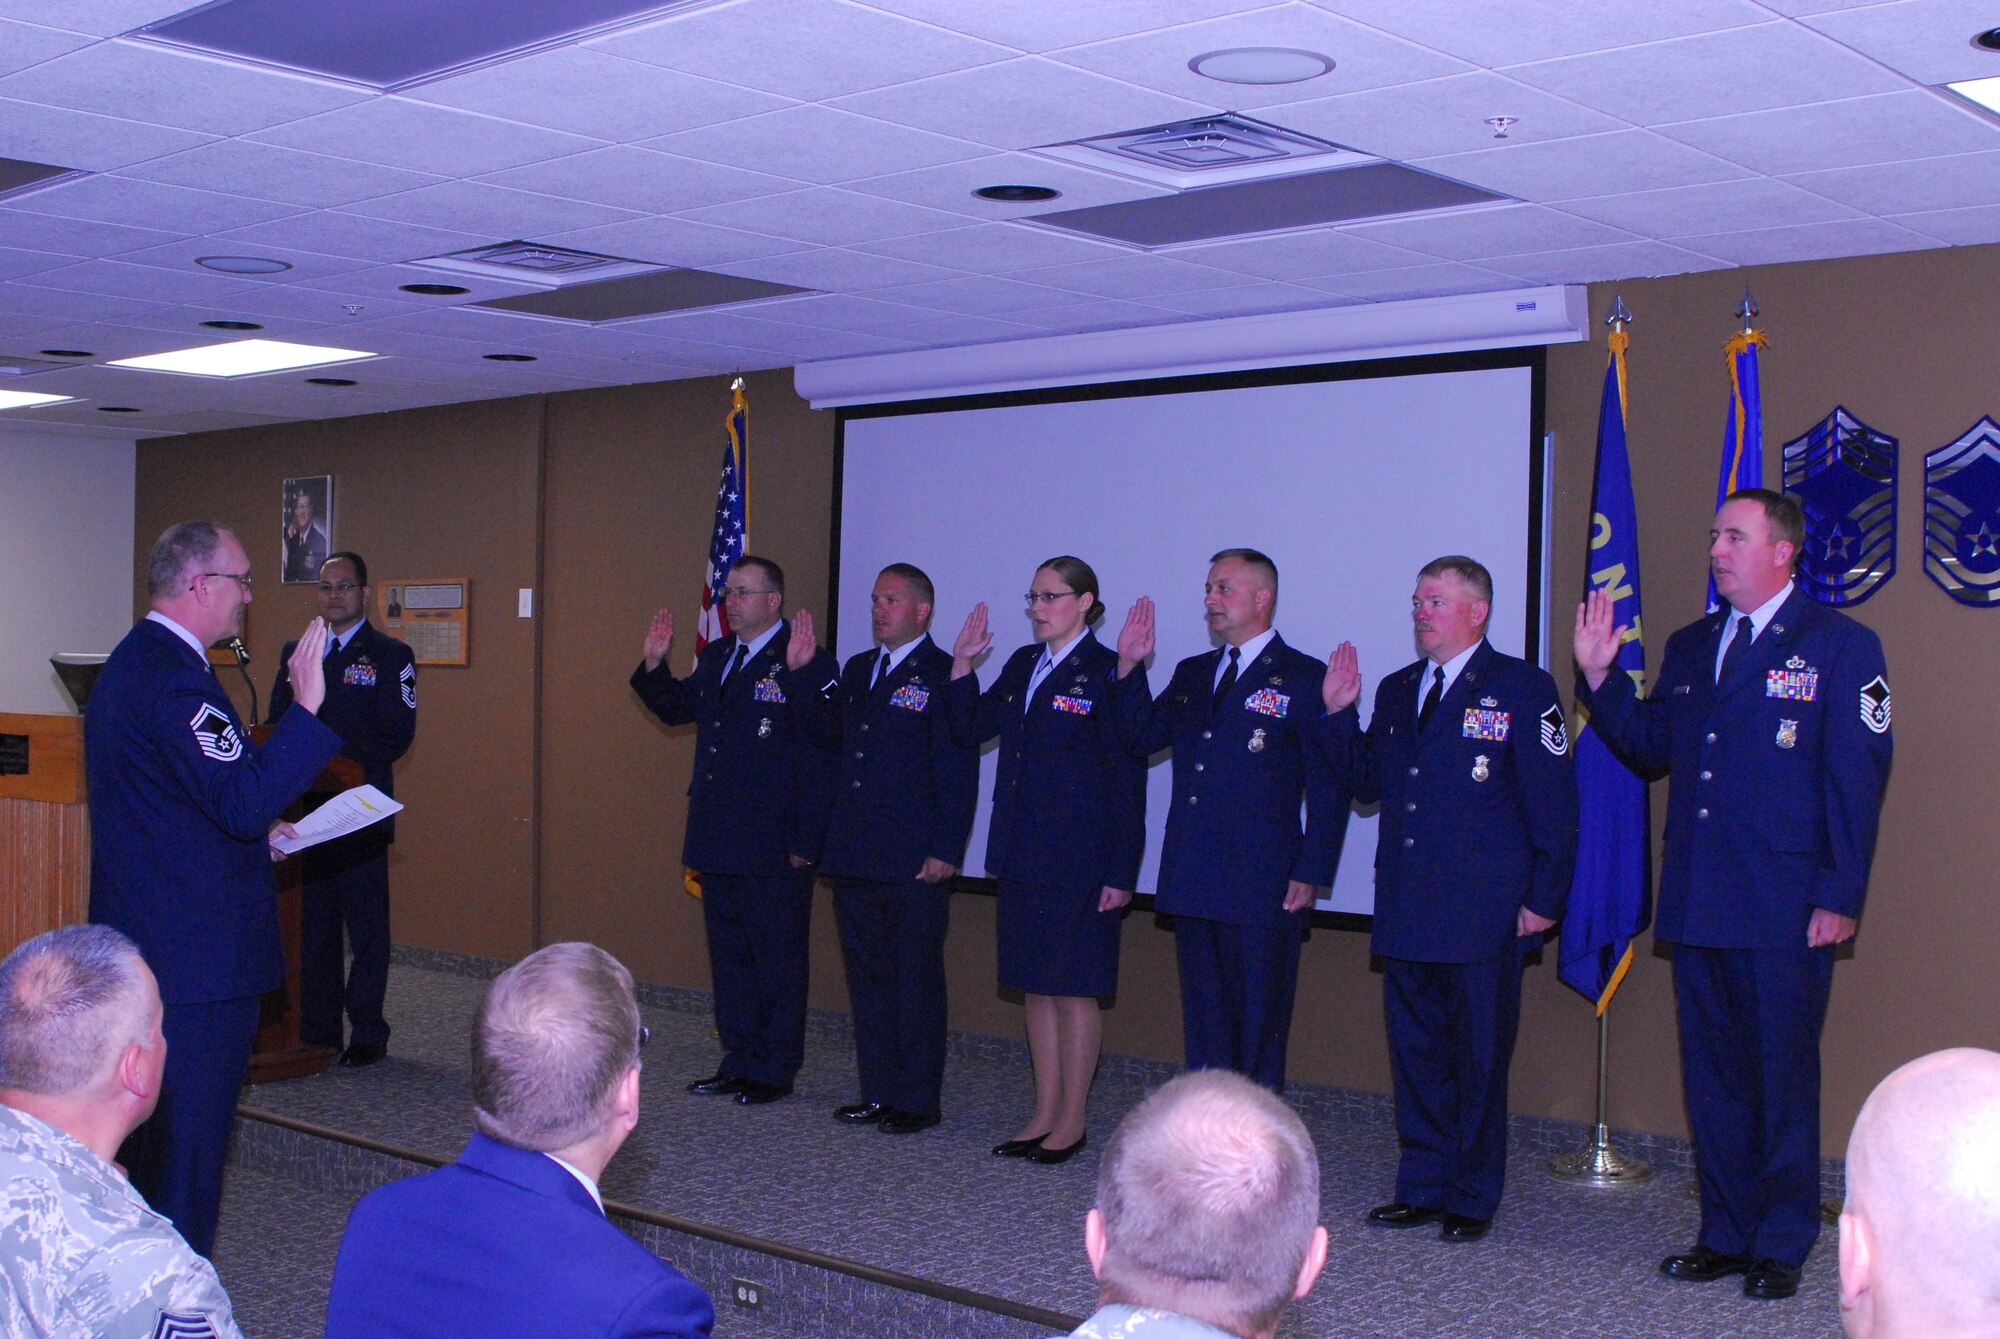 Senior Master Sgt. Bill Shirley, superintendent of inspections, inducts six of the newest master sergeants in the 120th Airlift Wing Larsen room, June 4, 2016. Attaining the rank of master sergeant allows the members to be a part of an elite group called the Top 3. (U.S. Air National Guard photo by Staff Sgt. Lindsey Soulsby/Released)